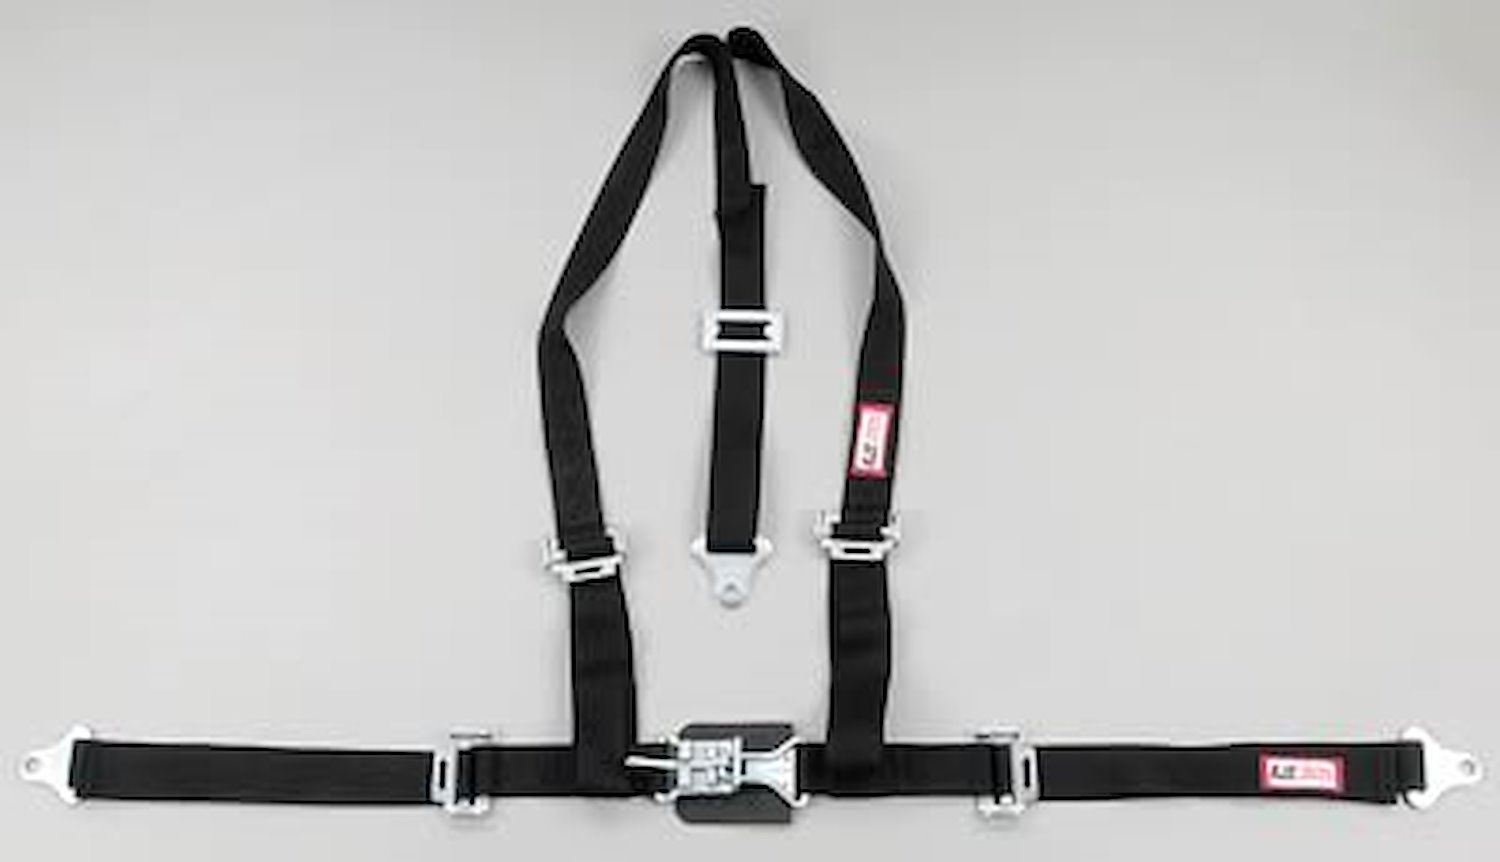 NON-SFI L&L HARNESS 3 PULL UP Lap Belt SEWN IN 2 Shoulder Harness V ROLL BAR Mount w/STERNUM STRAP ALL WRAP ENDS YELLOW